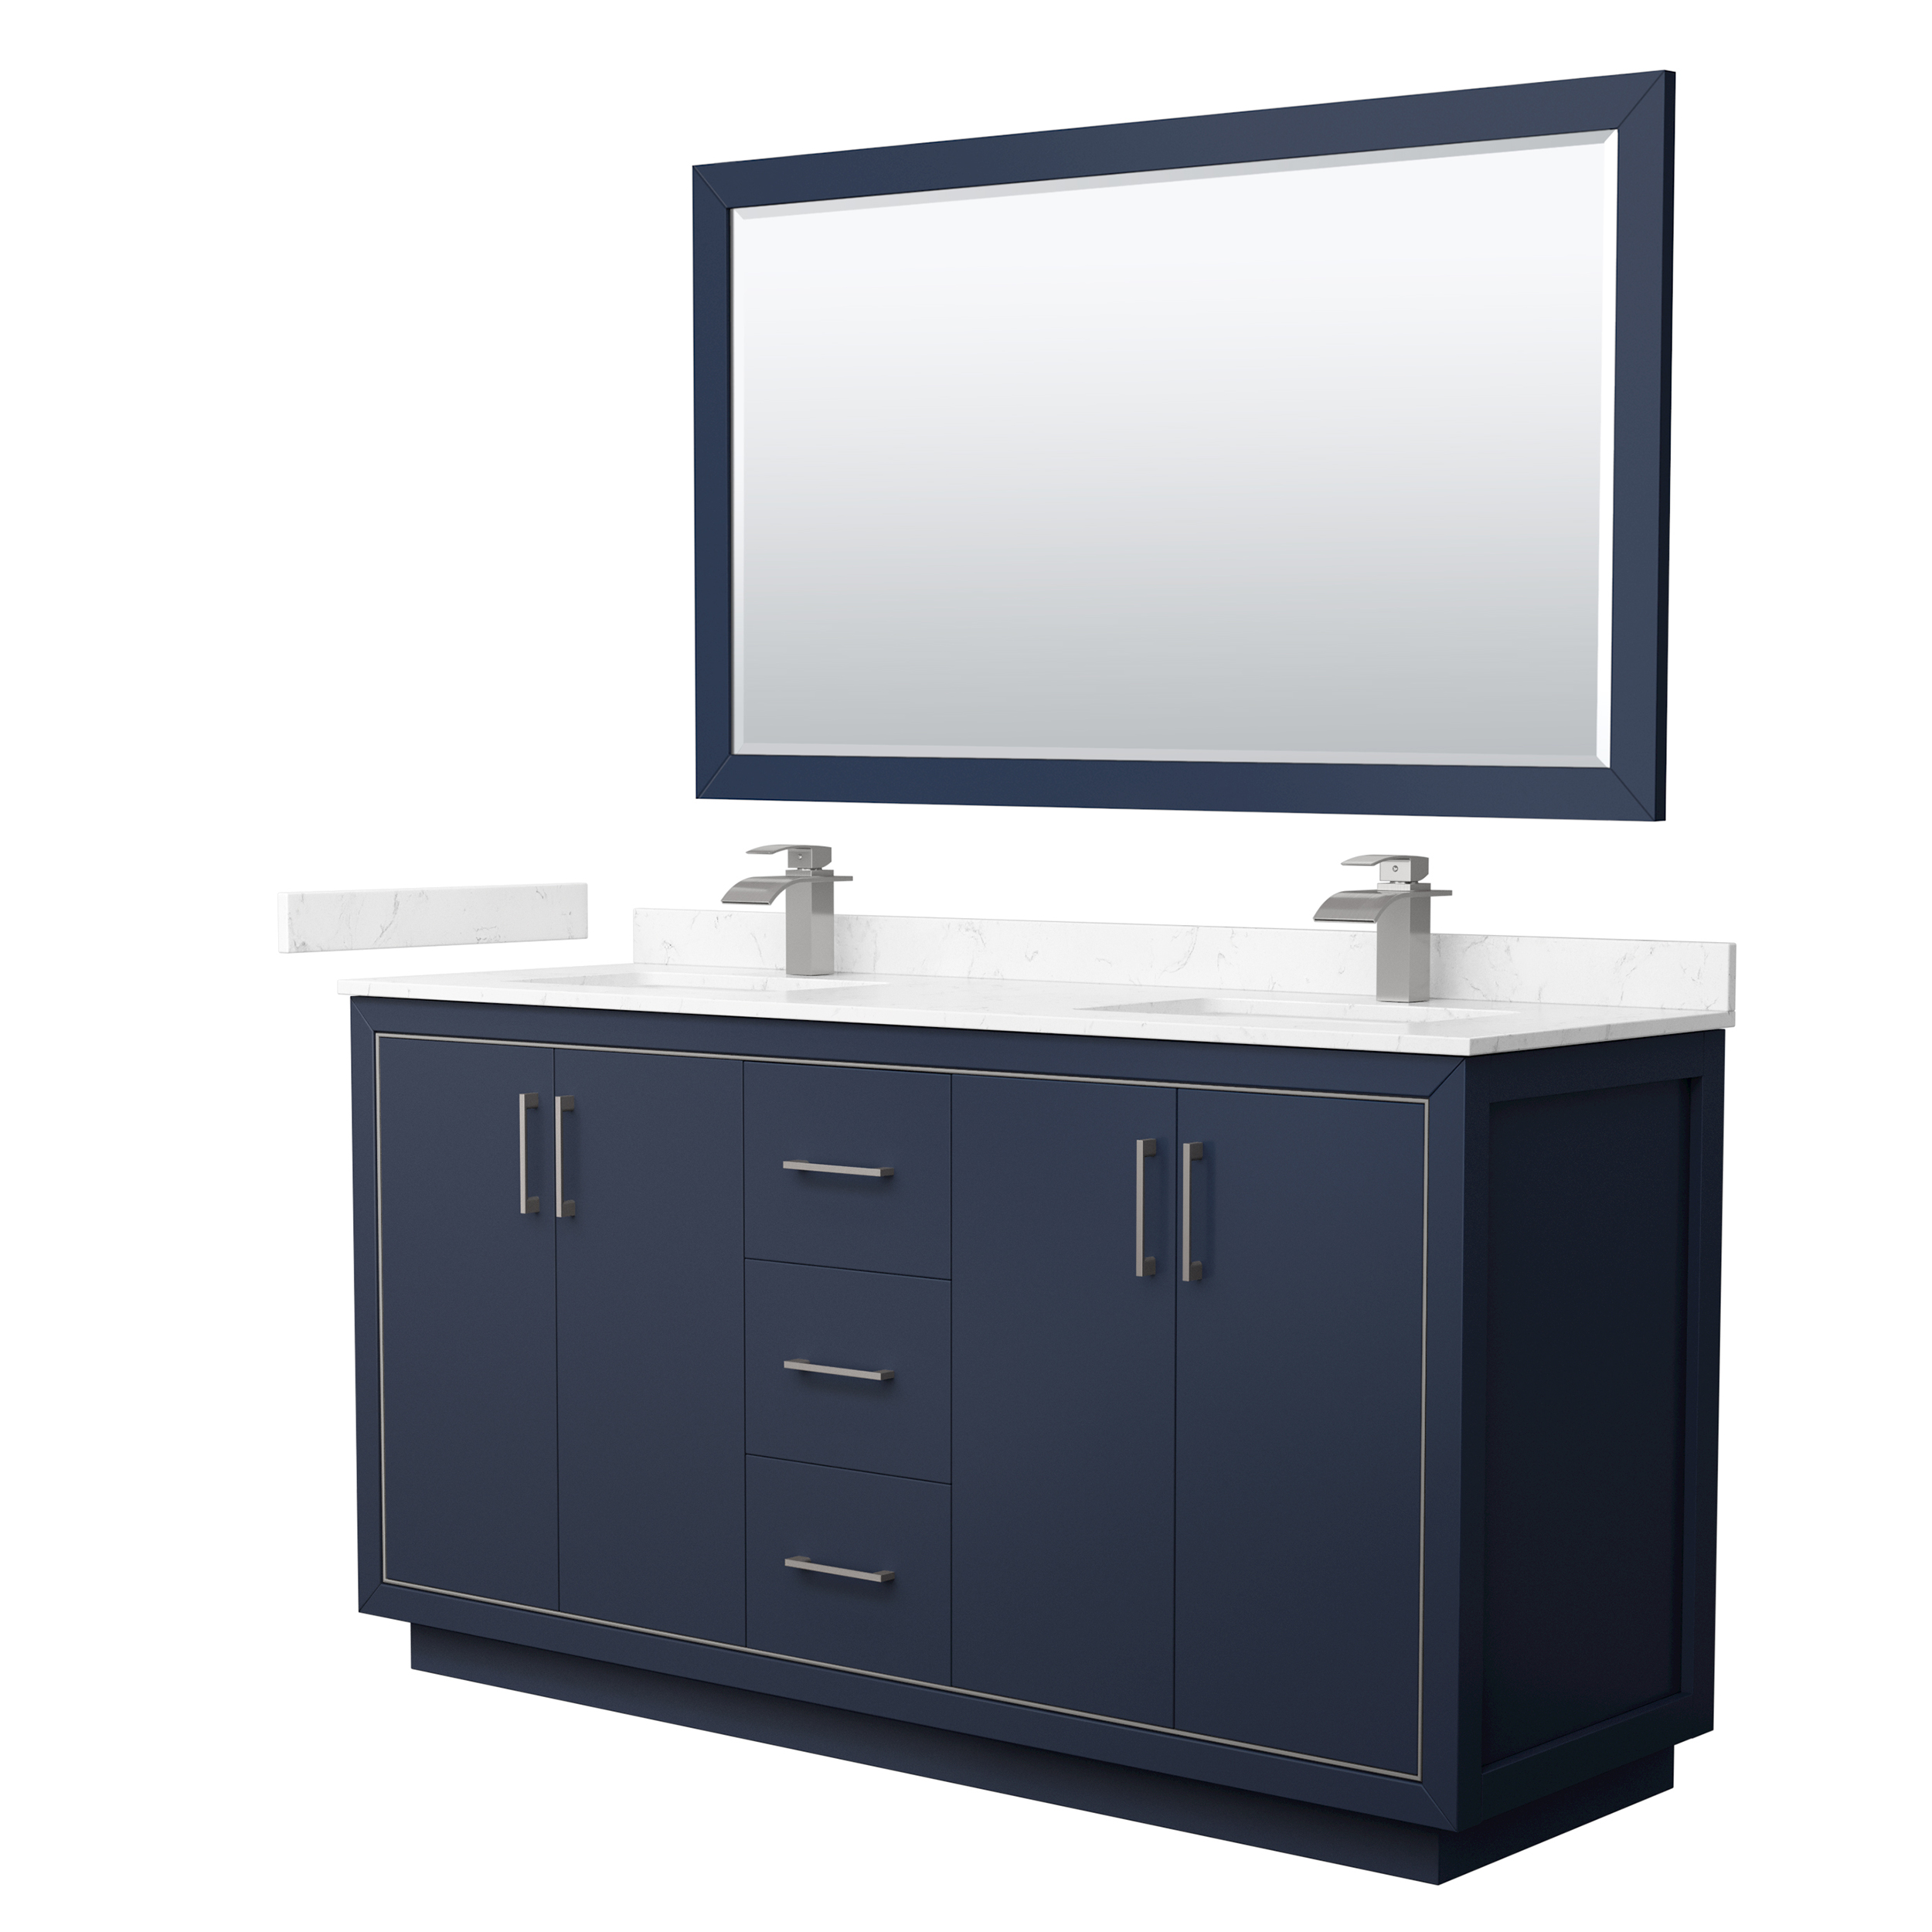 66" Double Bathroom Vanity with 4 Color Options, 3 Countertop Options, 3 Hardware Options and Mirror Option